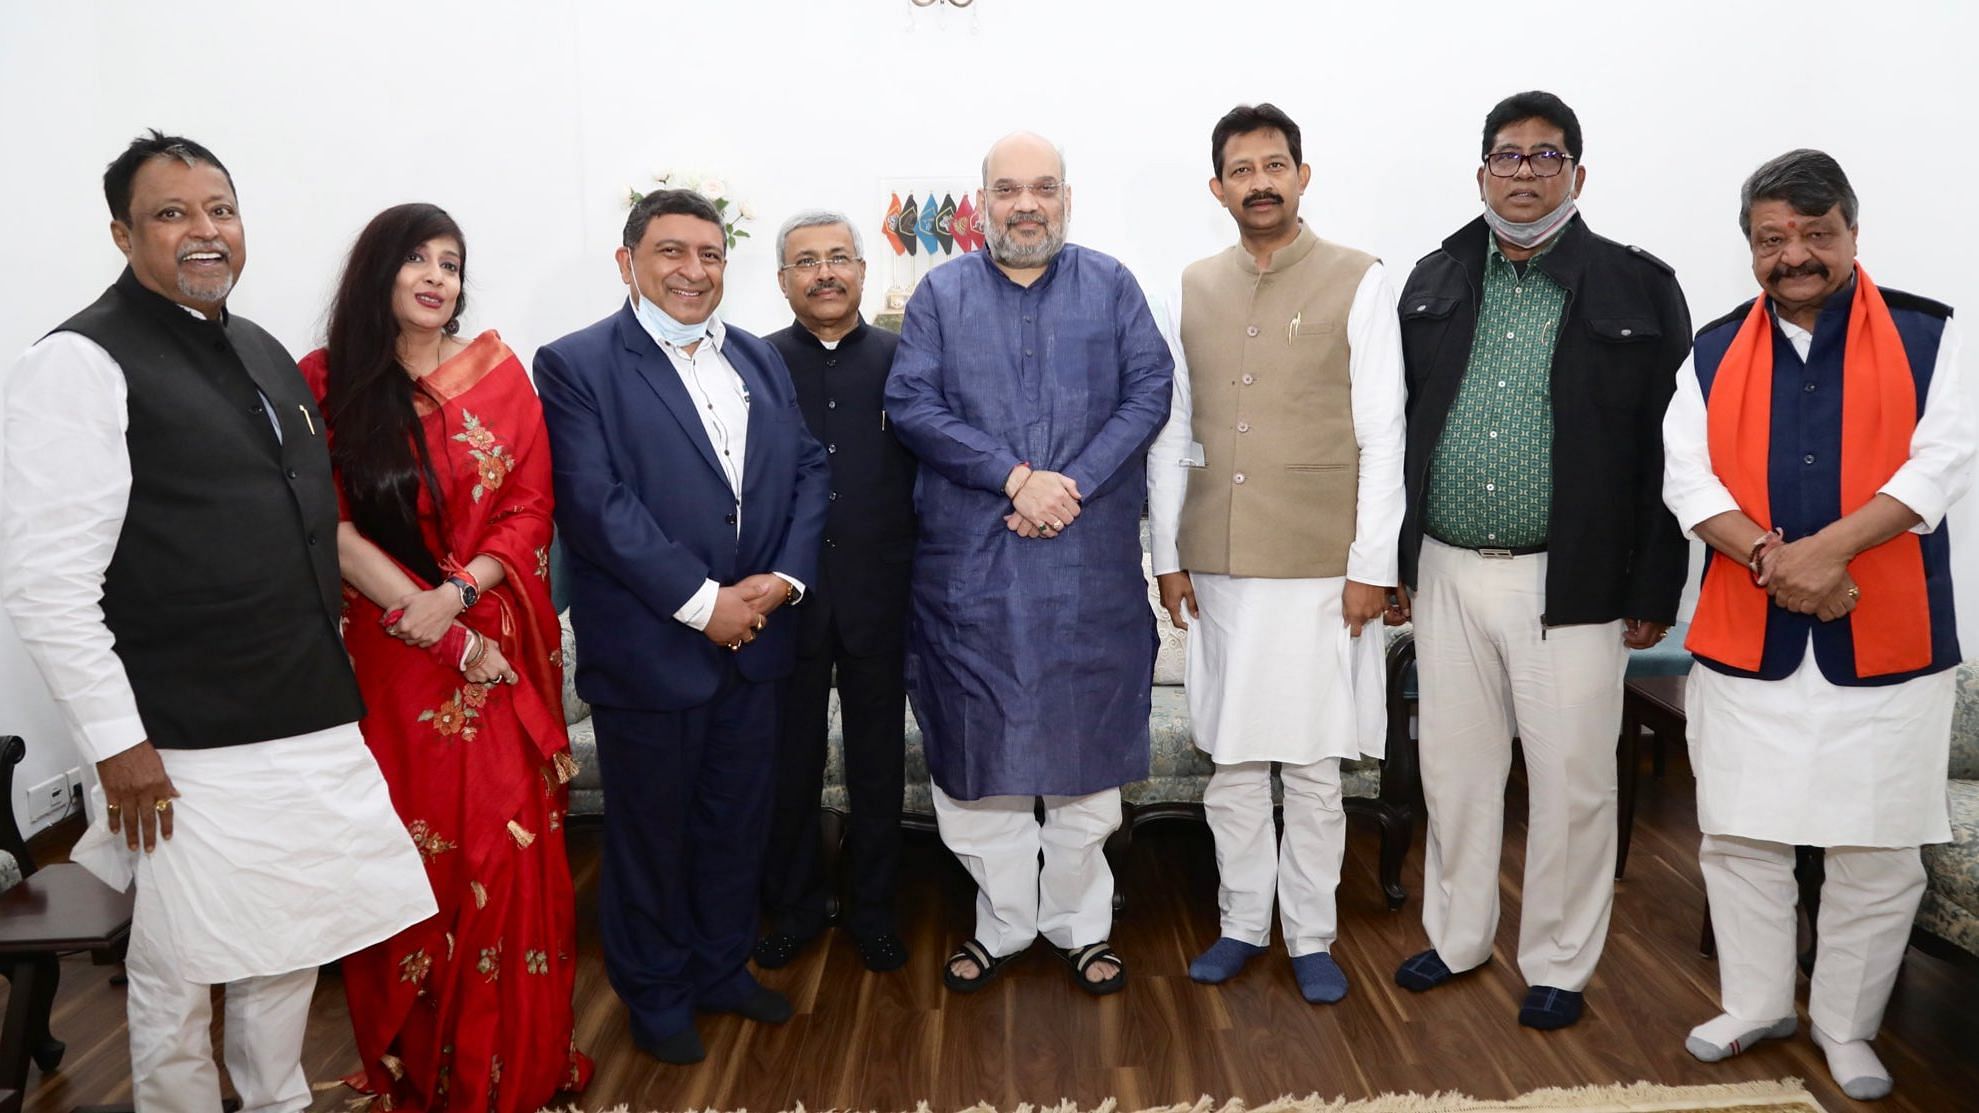 Five Trinamool leaders joined the BJP on 30 January, Saturday after a meeting with Union Home Minister Amit Shah.